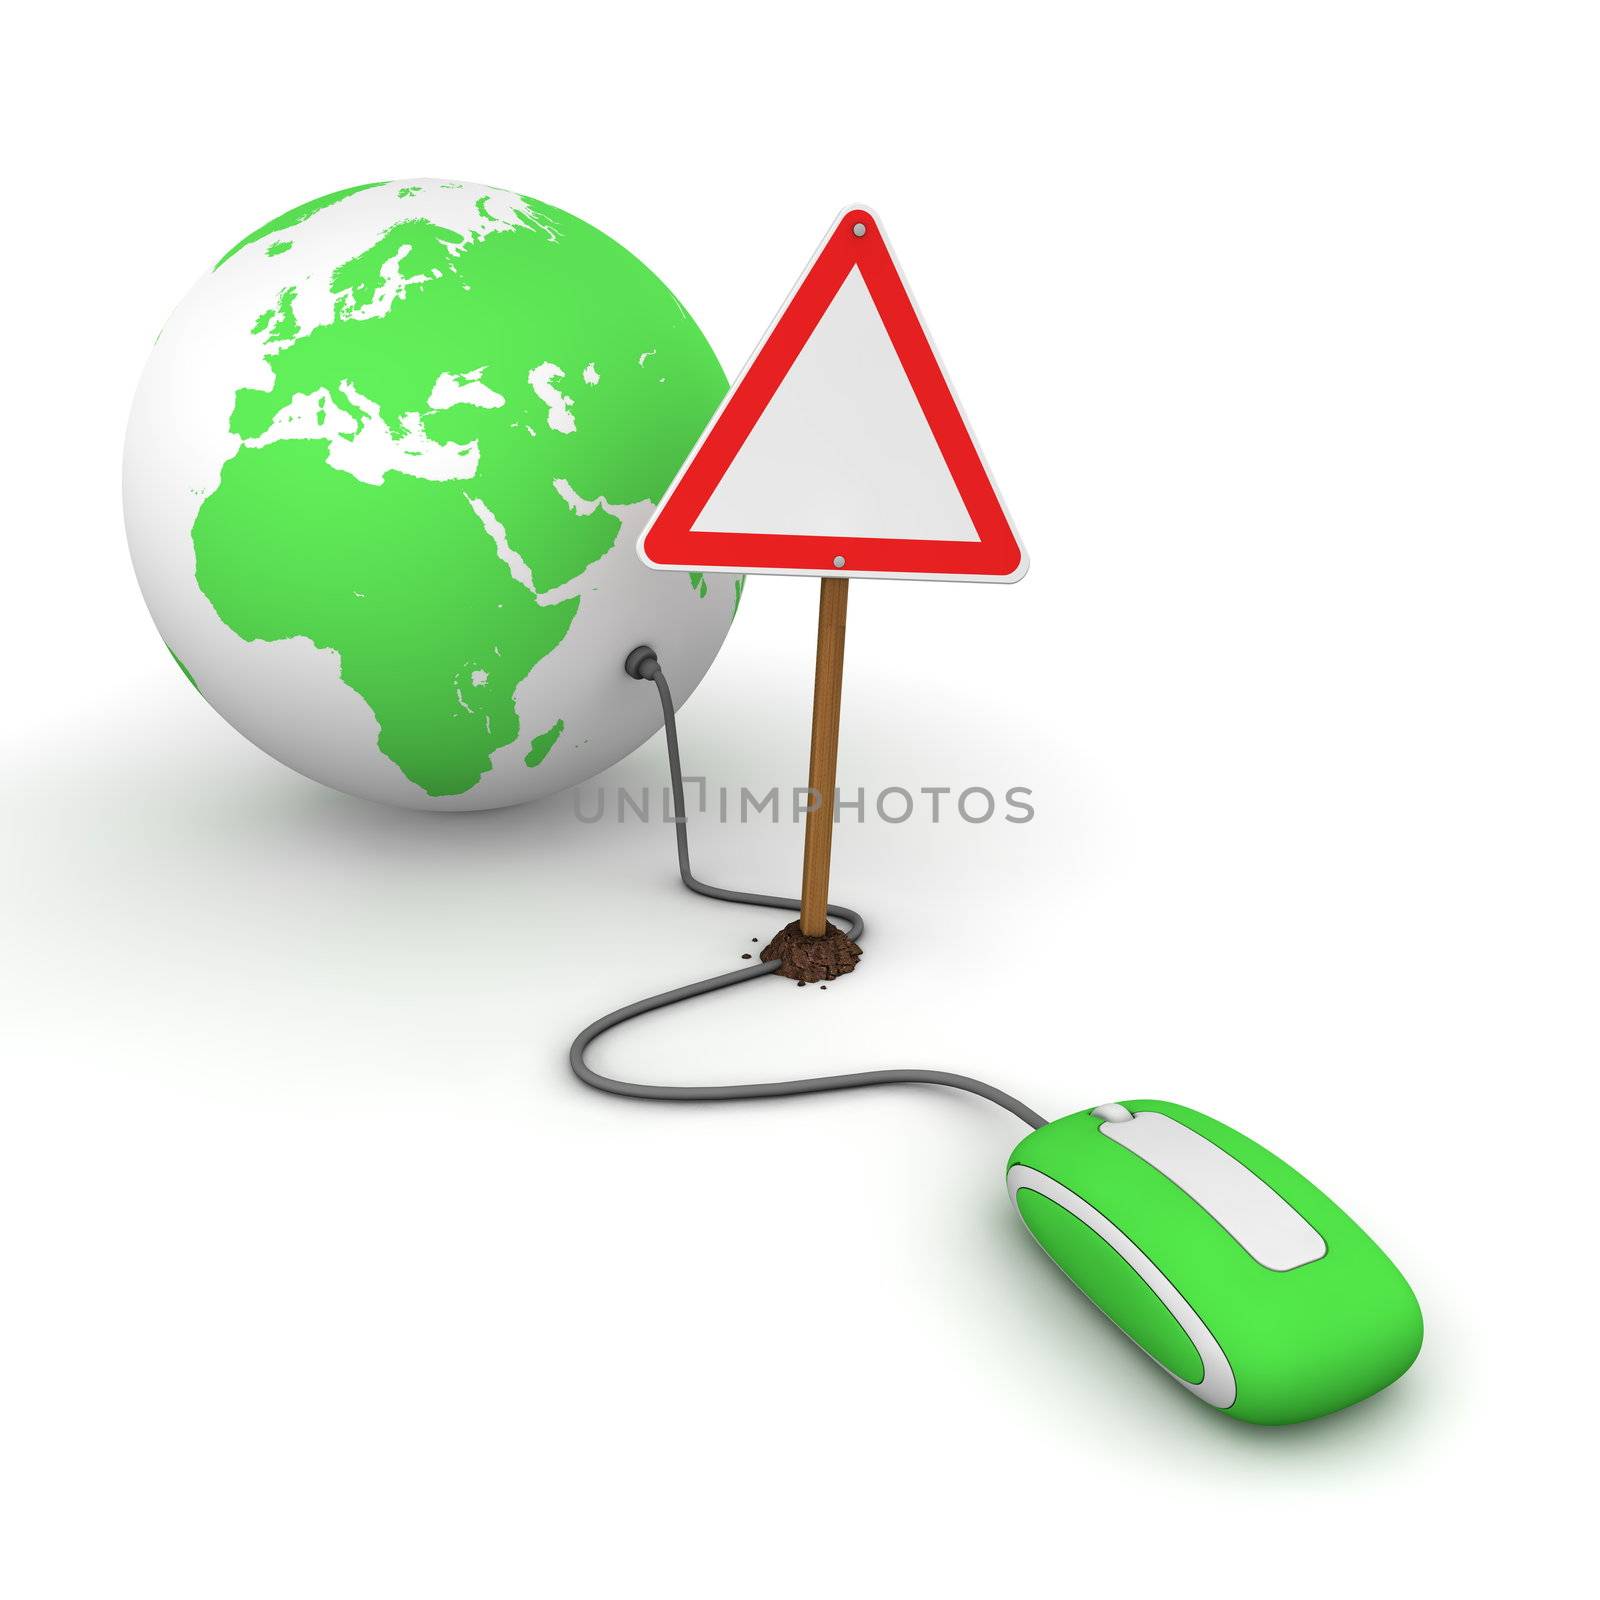 green computer mouse is connected to a green globe - surfing and browsing is blocked by a triangular red-white warning sign that cuts the cable - empty template sign